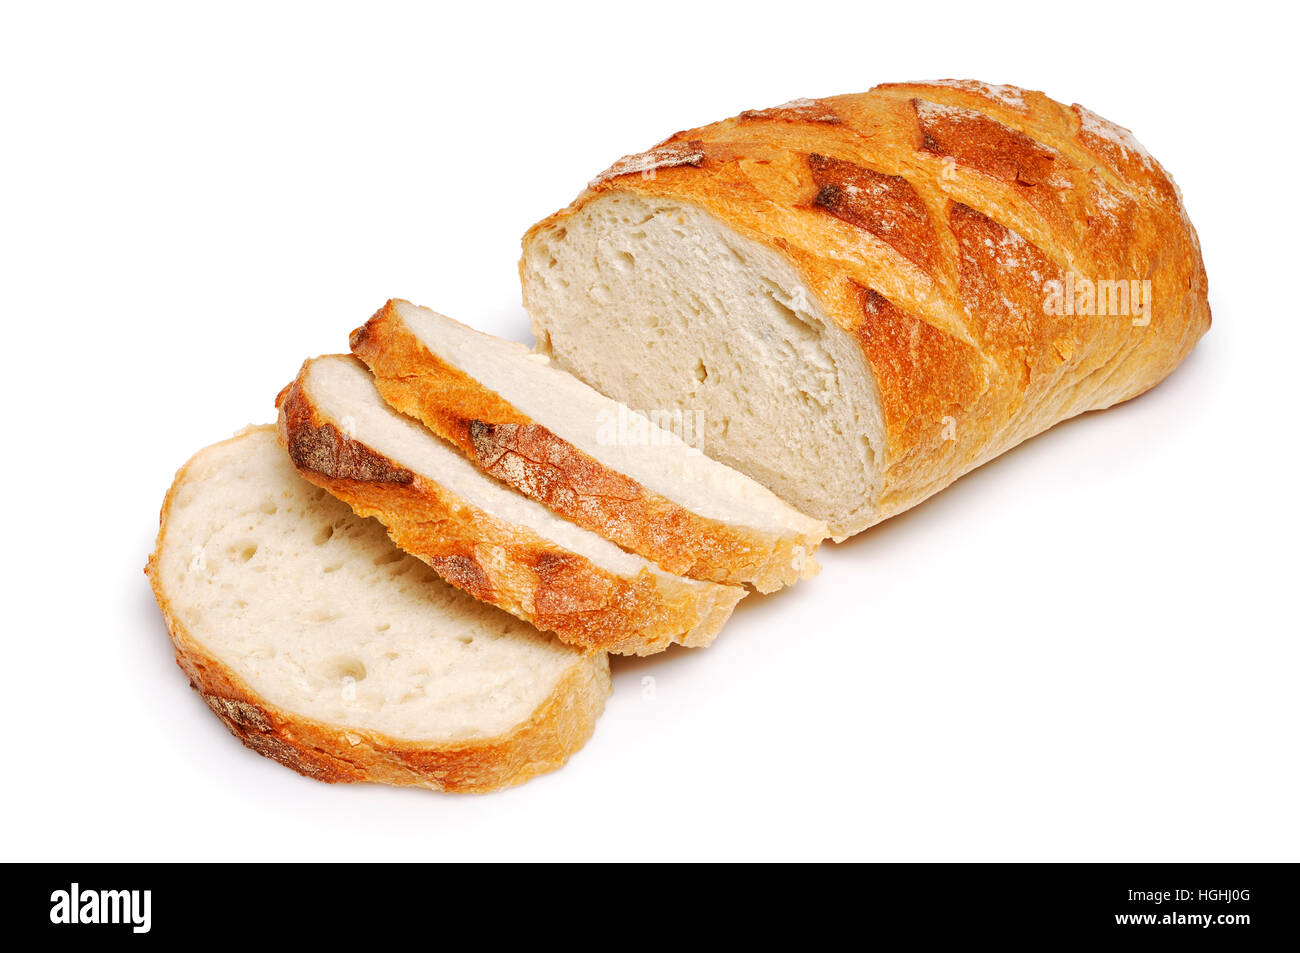 Loaf of Bread Stock Photo